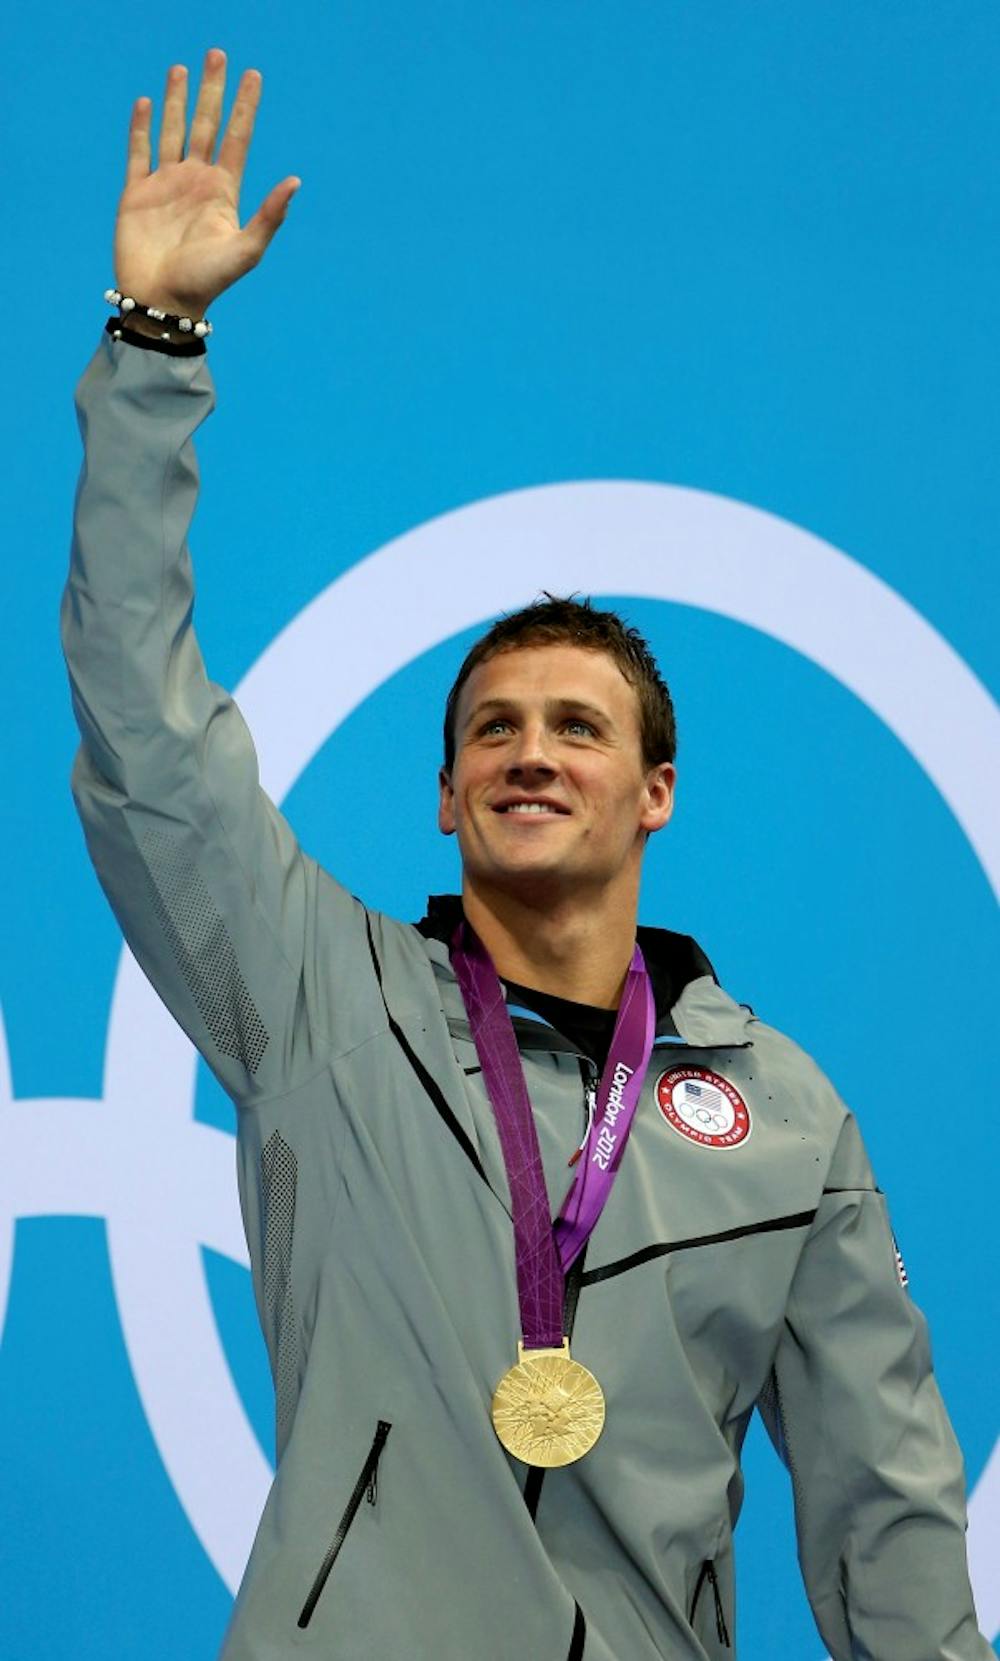 Ryan Lochte of the United States acknowledges the crowd after receiving his gold medal for winning the 400m Individual Medley during the 2012 Summer Olympics at the Aquatics Centre on Saturday, July 28, 2012 in London, England. (Vernon Bryant/Dallas Morning News/MCT)